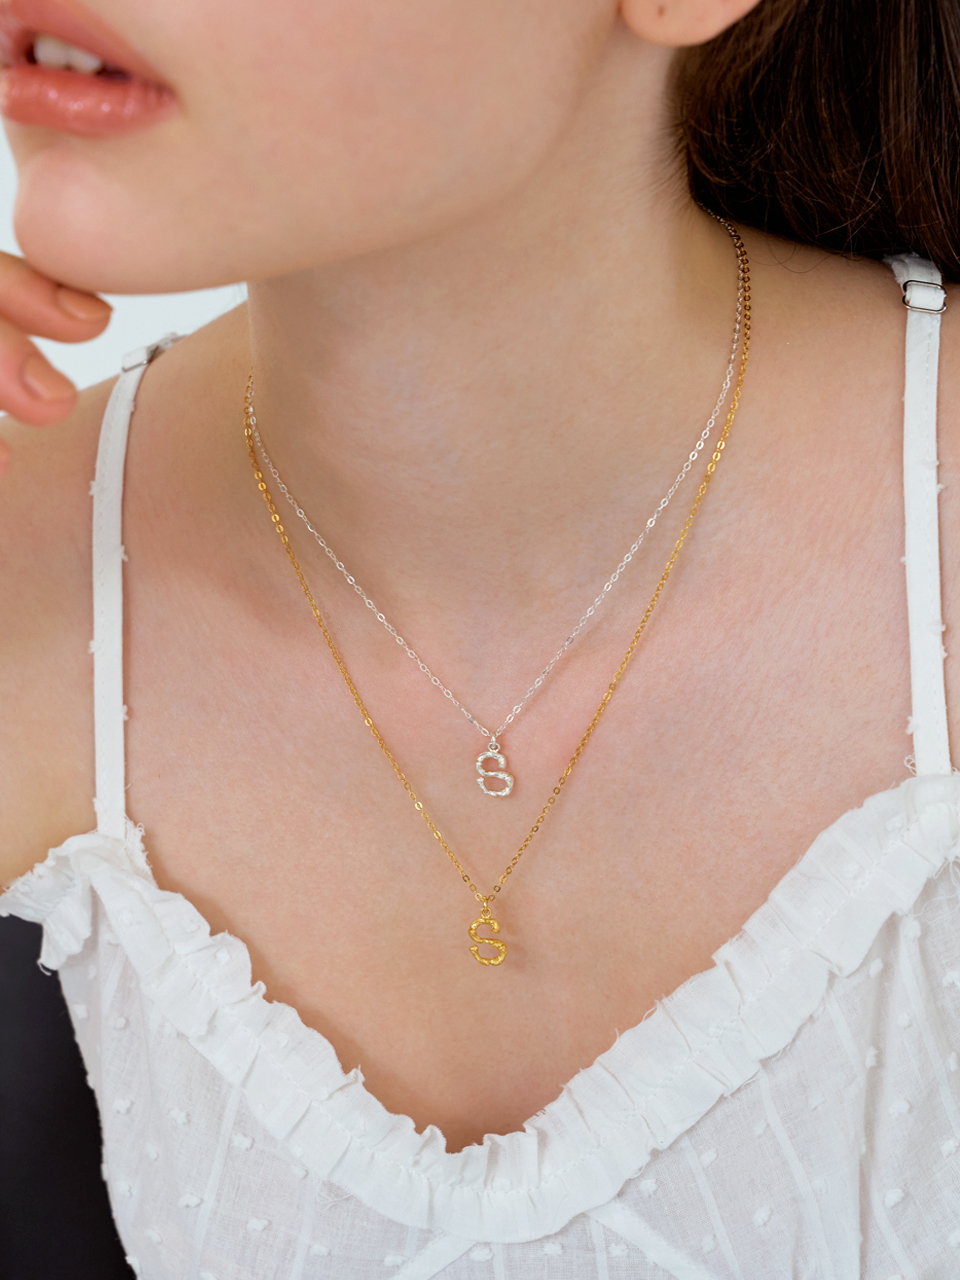 daily initial necklace